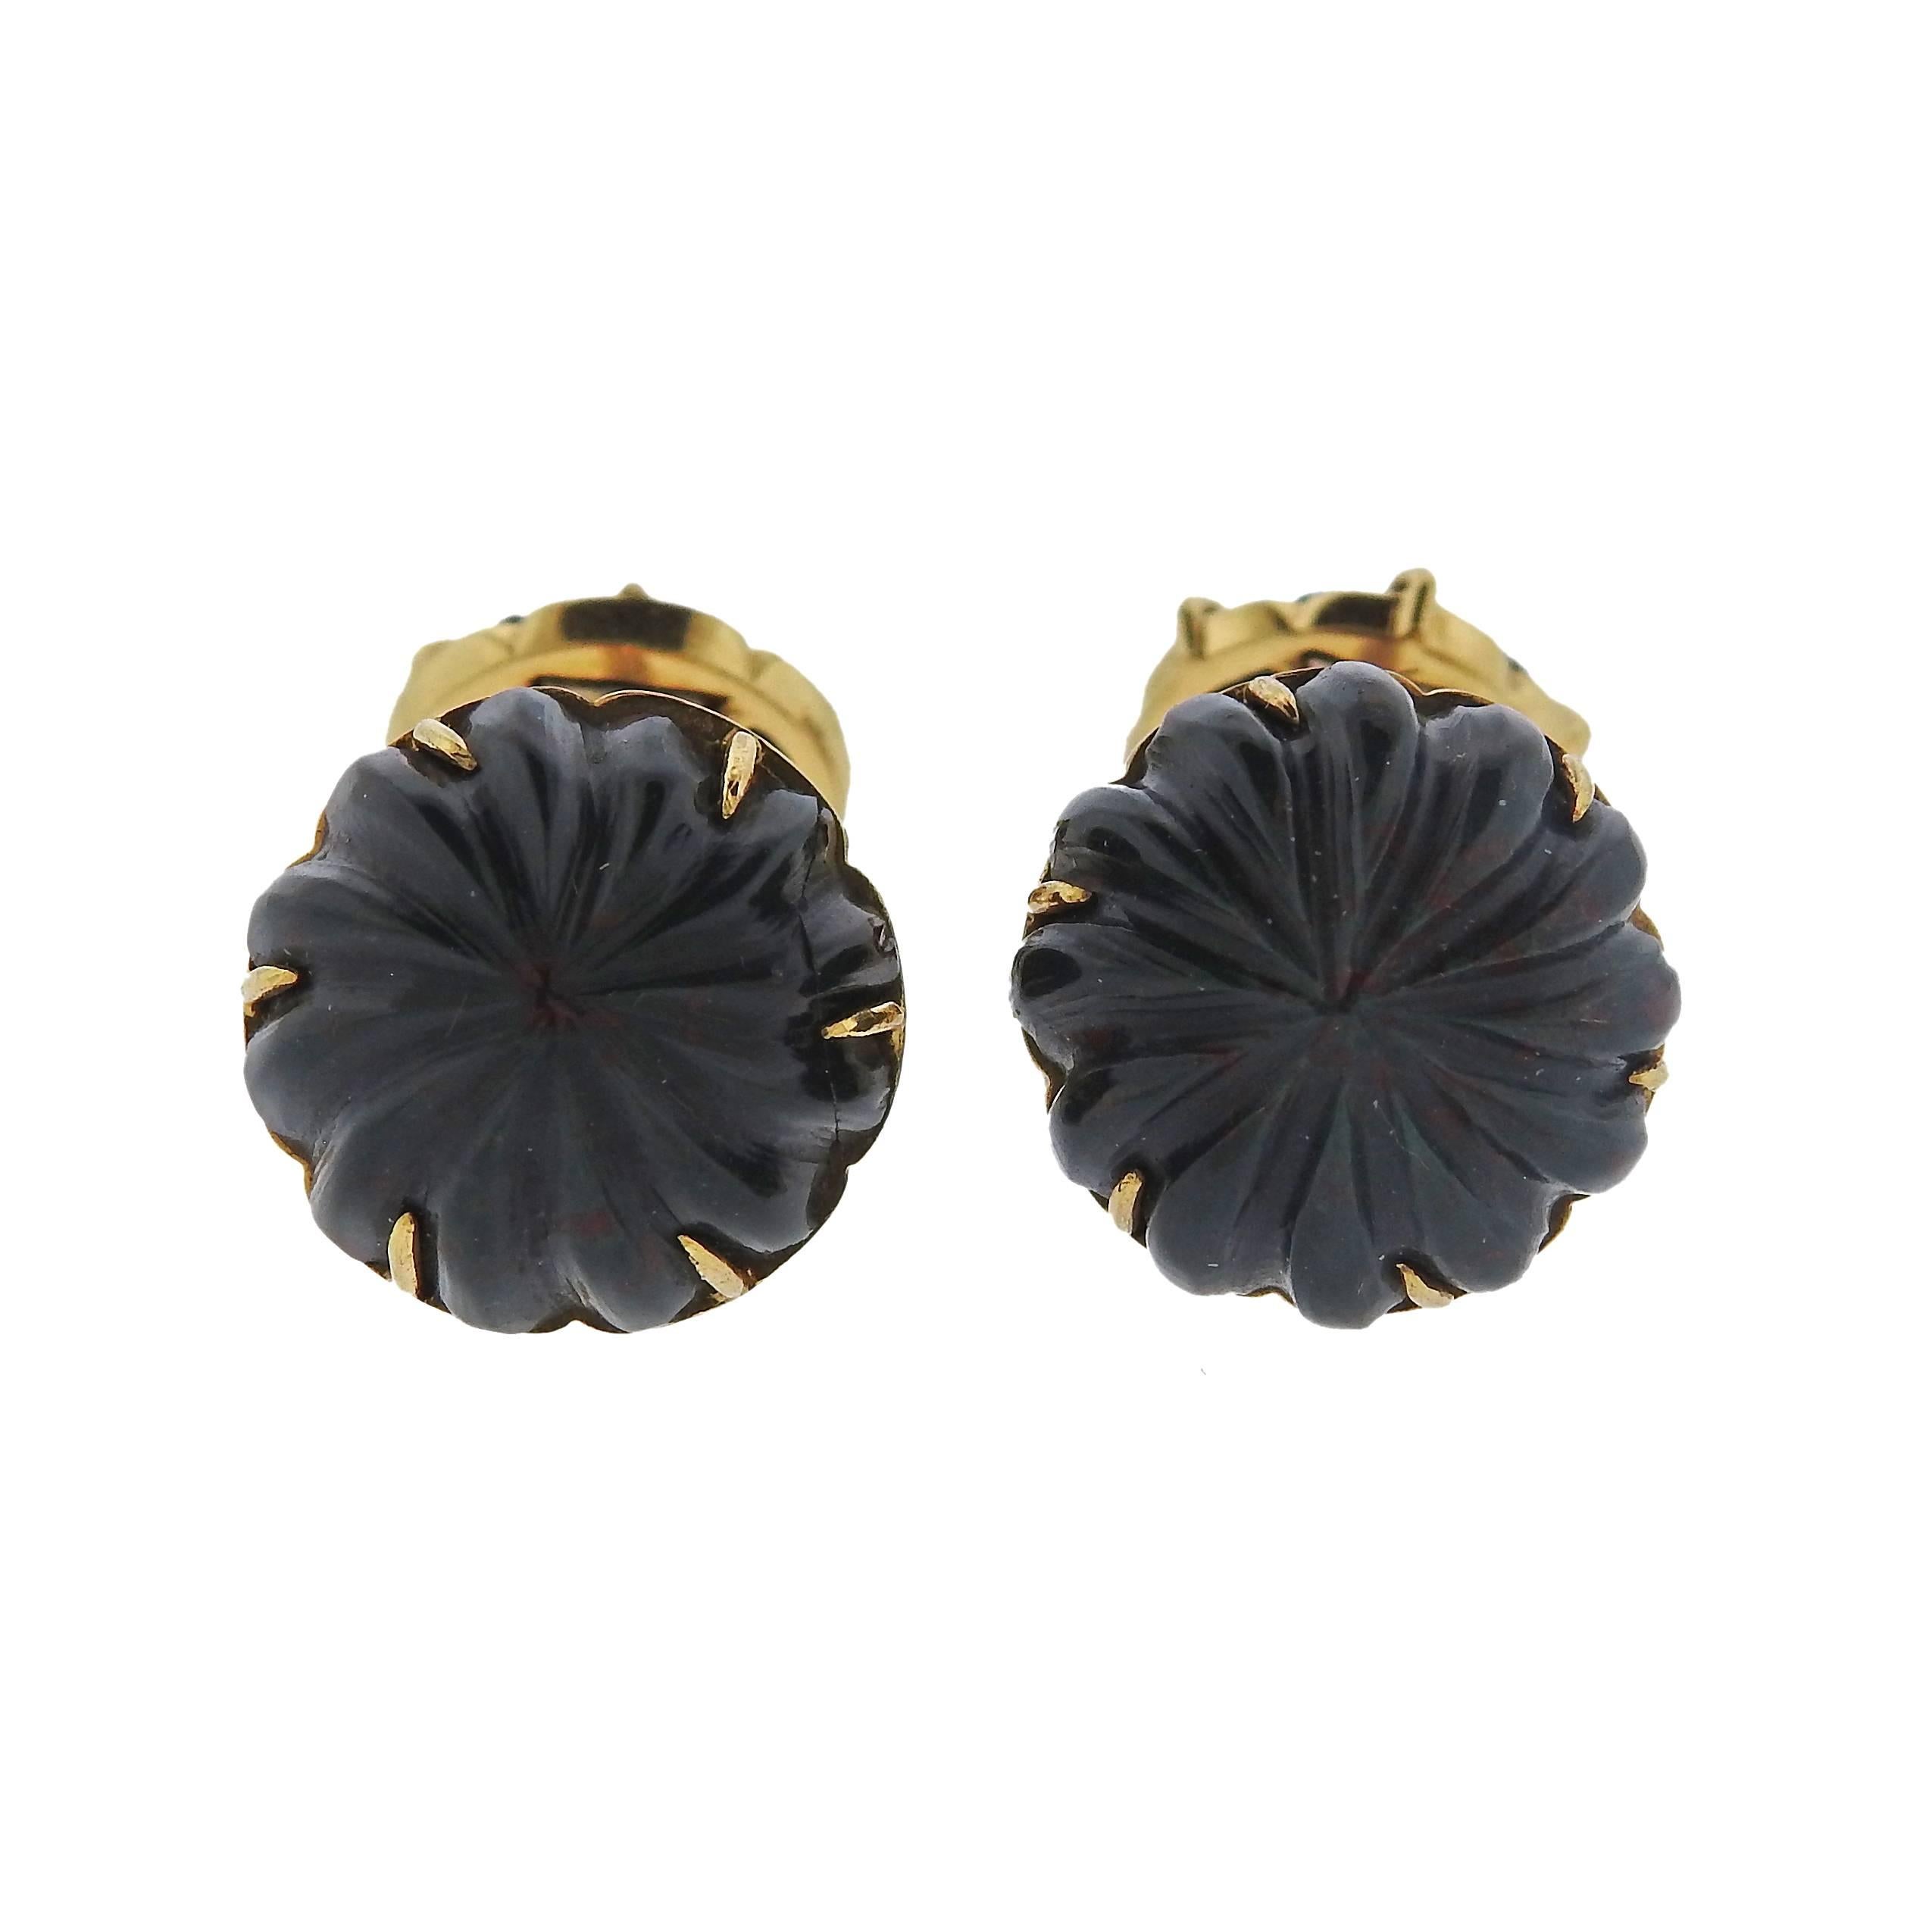 Pair of 18k yellow gold cufflinks, crafted by Tiffany & Co in France, set with carved bloodstone. Cufflink top is 16mm in diameter, back - 12mm in diameter. Marked: France, 18k, Tiffany & Co. Weight - 15.5 grams 